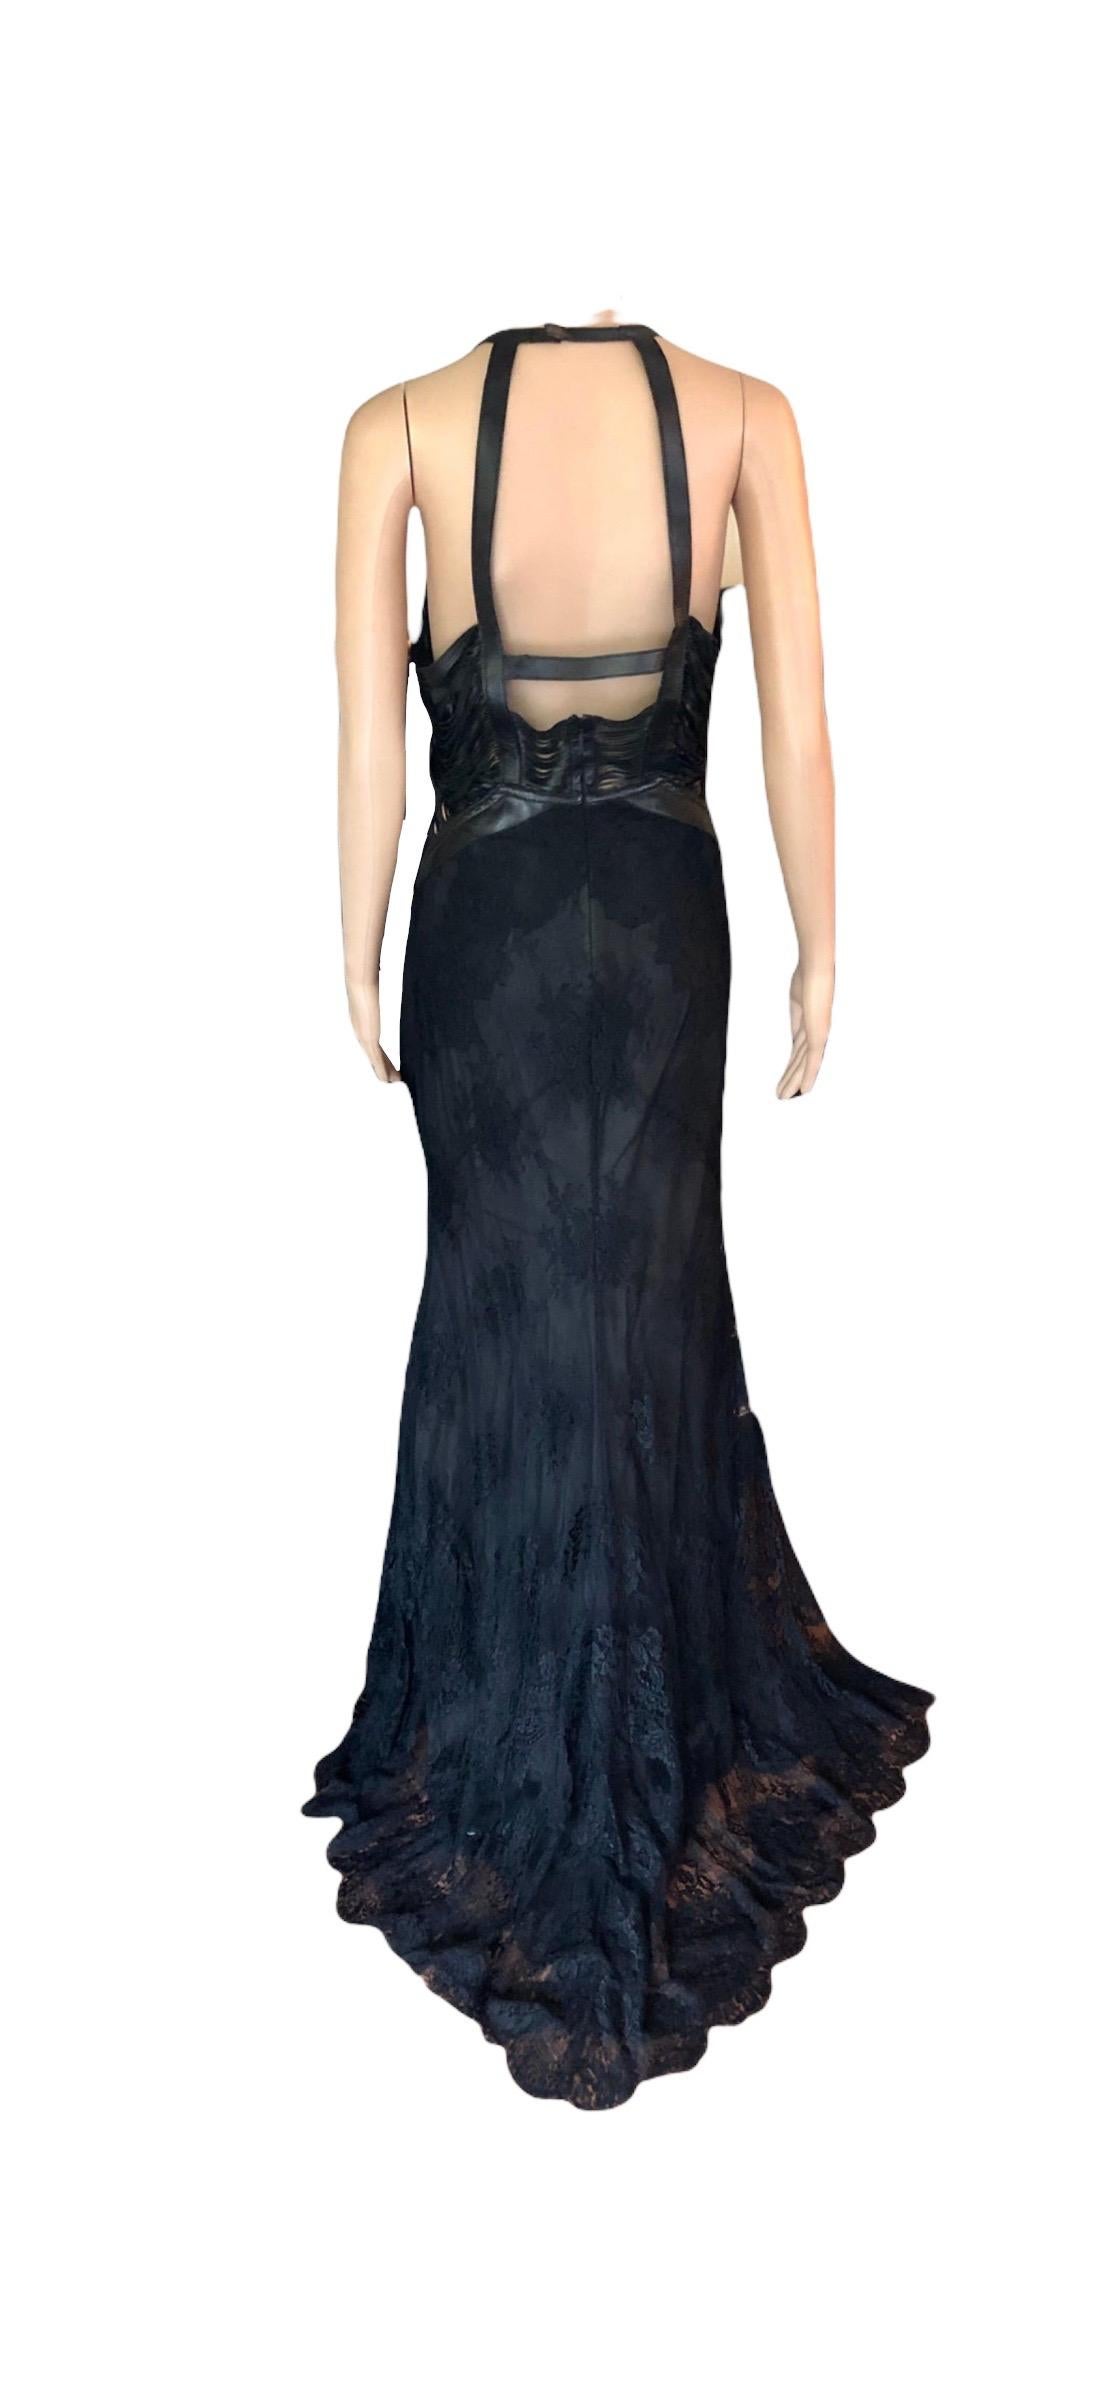 Roberto Cavalli S/S 2013 Leather Cutout Open Back Black Evening Dress Gown For Sale 7